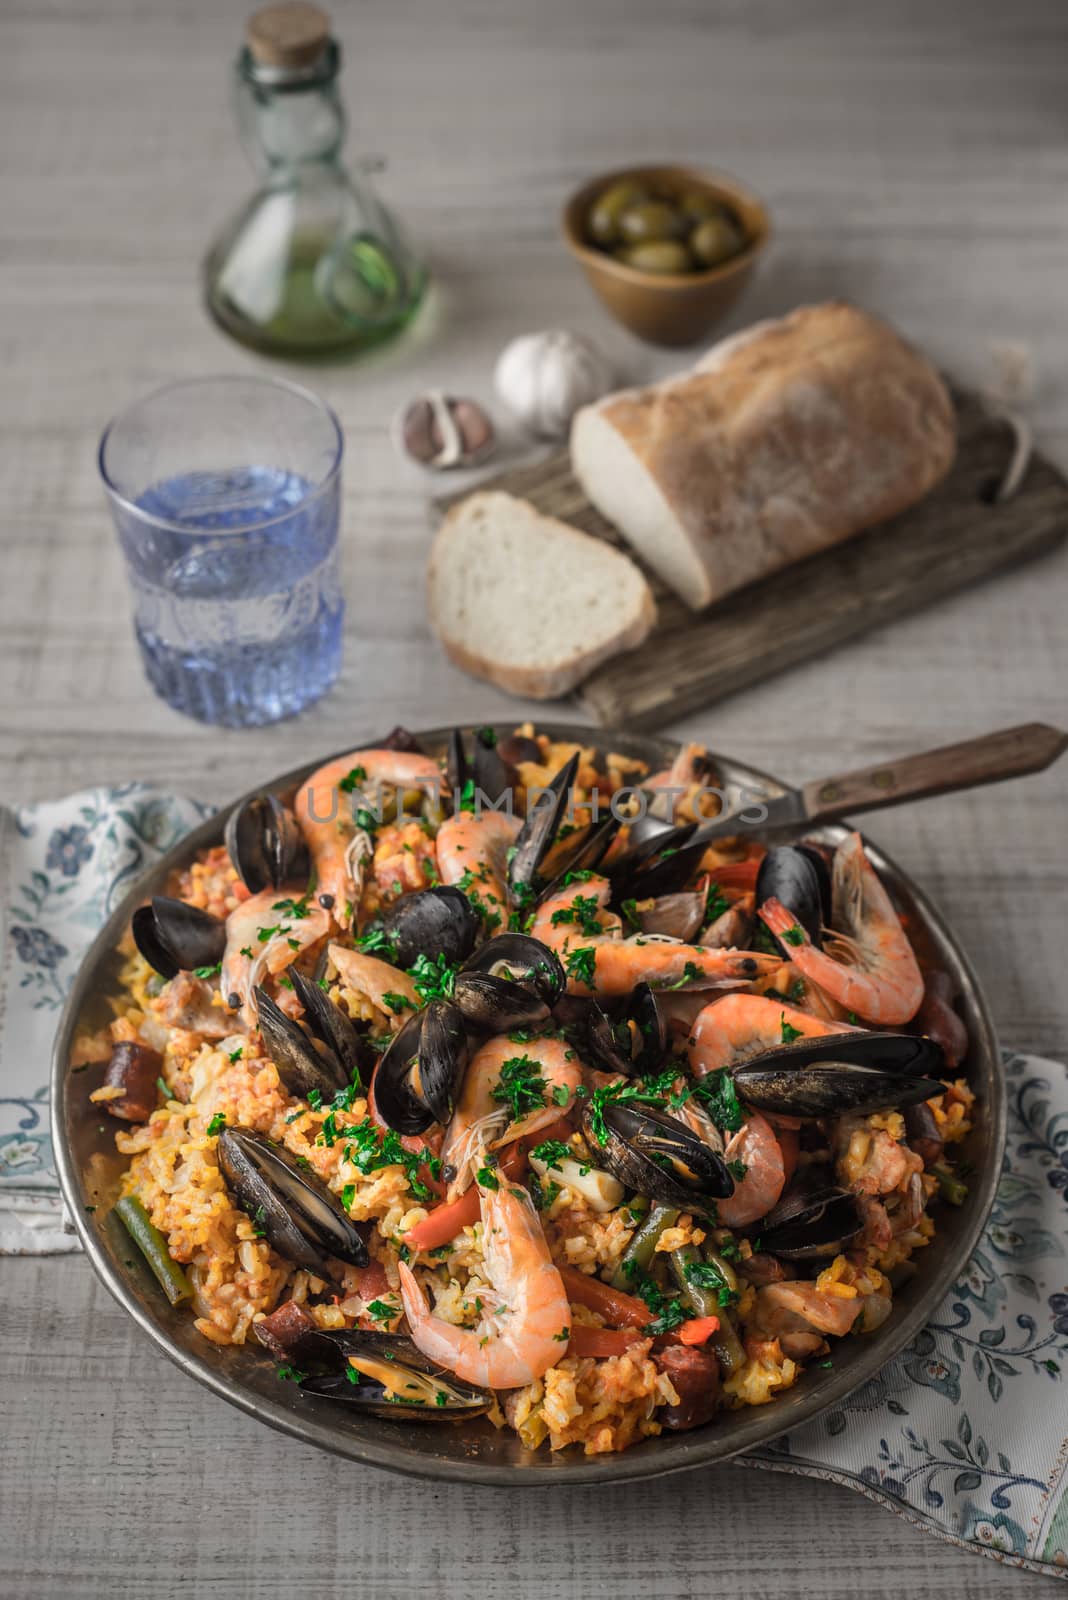 Paella in the metal plate on the wooden table by Deniskarpenkov